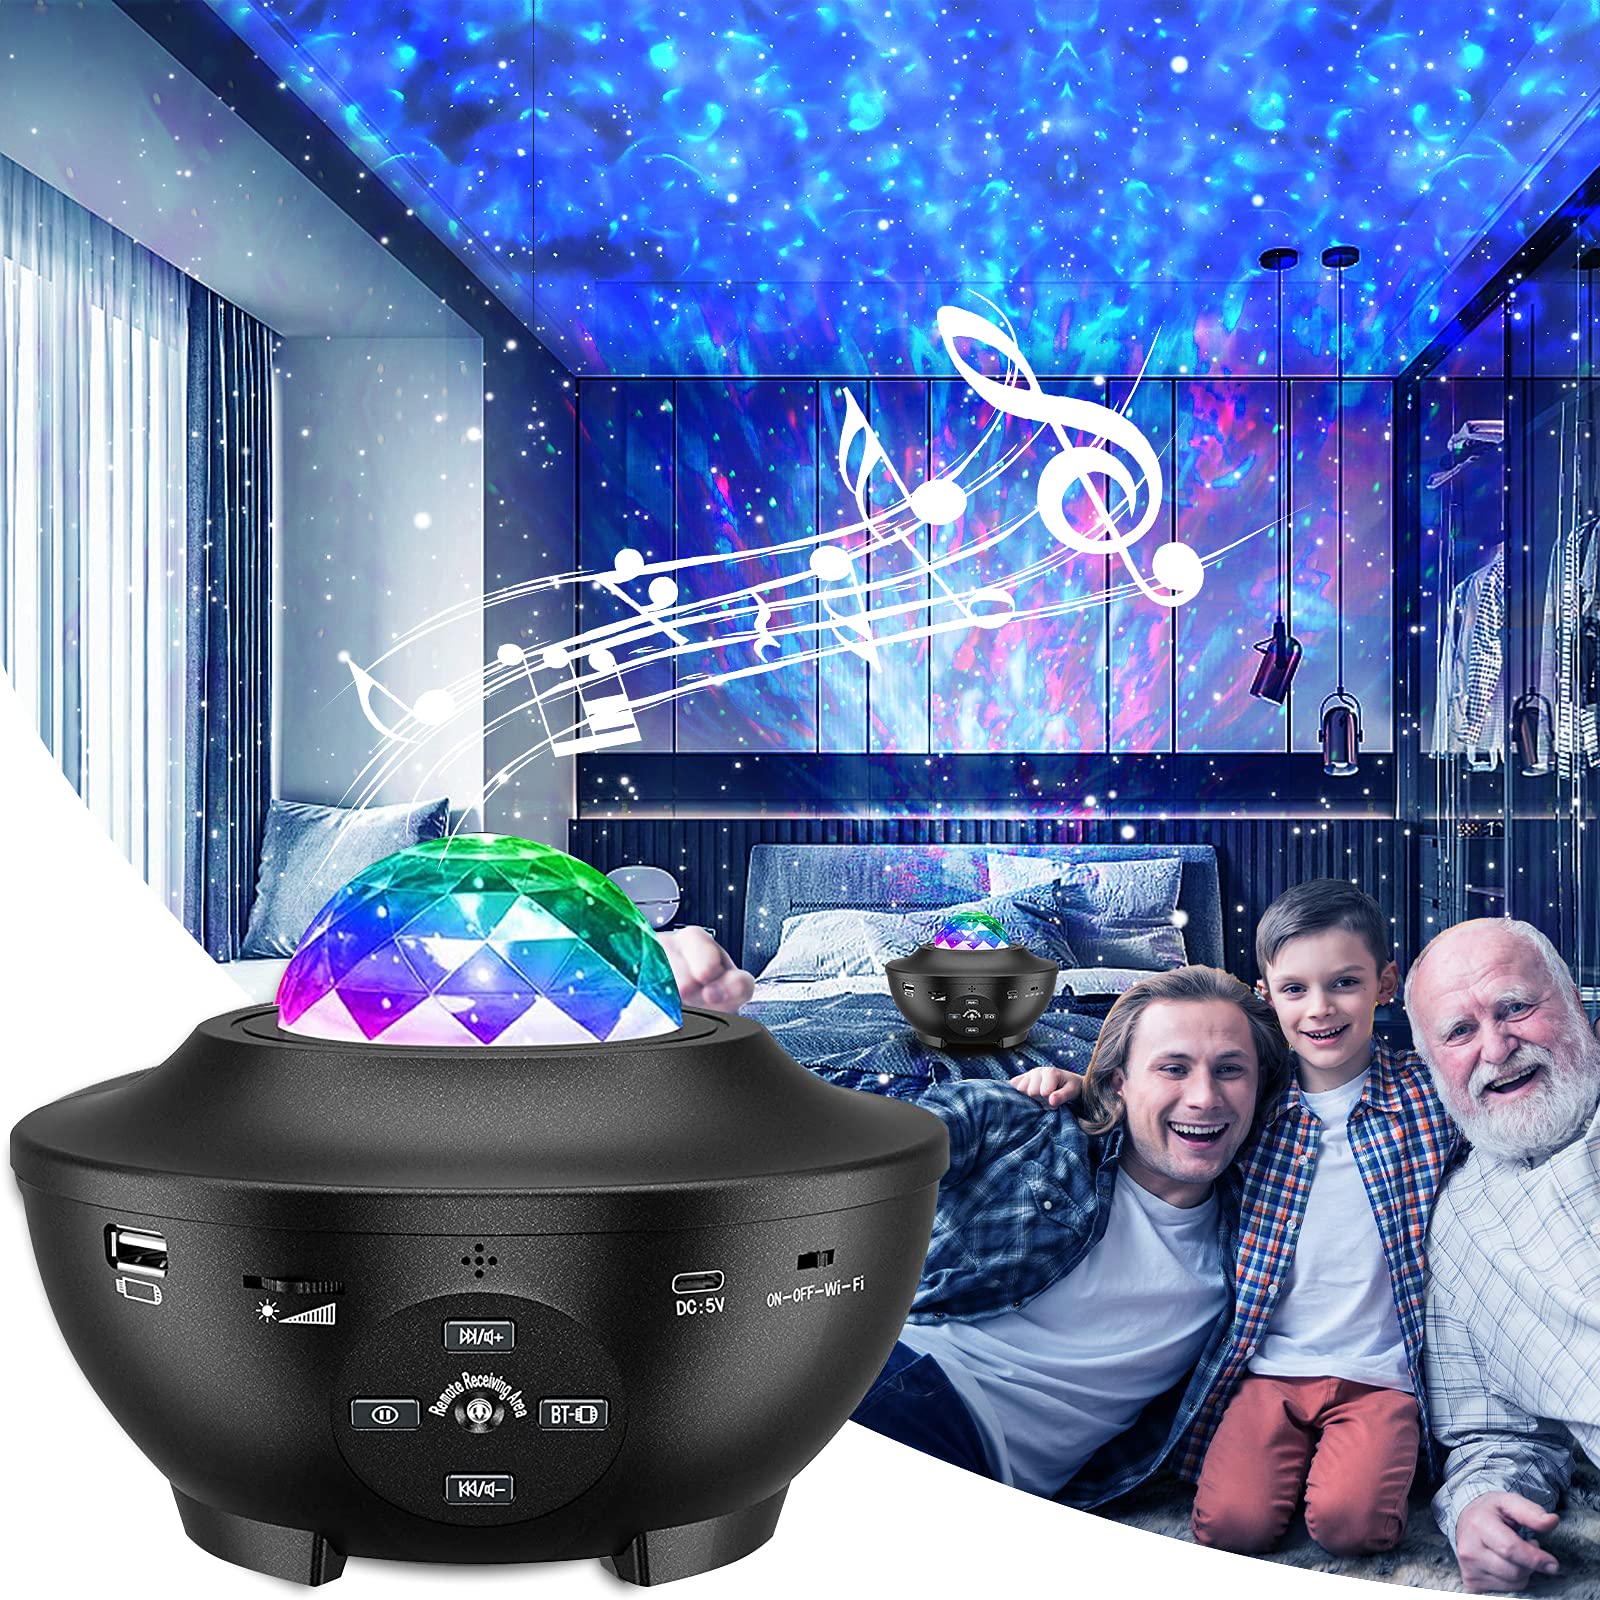 eLinkSmart Star Projector, Night & Ocean Lamp with Multiple Light Modes & Timer, Galaxy Projector with Bluetooth Speaker, Children's Night Lighting, Sky Light for Bedroom/Gameroom/Party, USB C Power